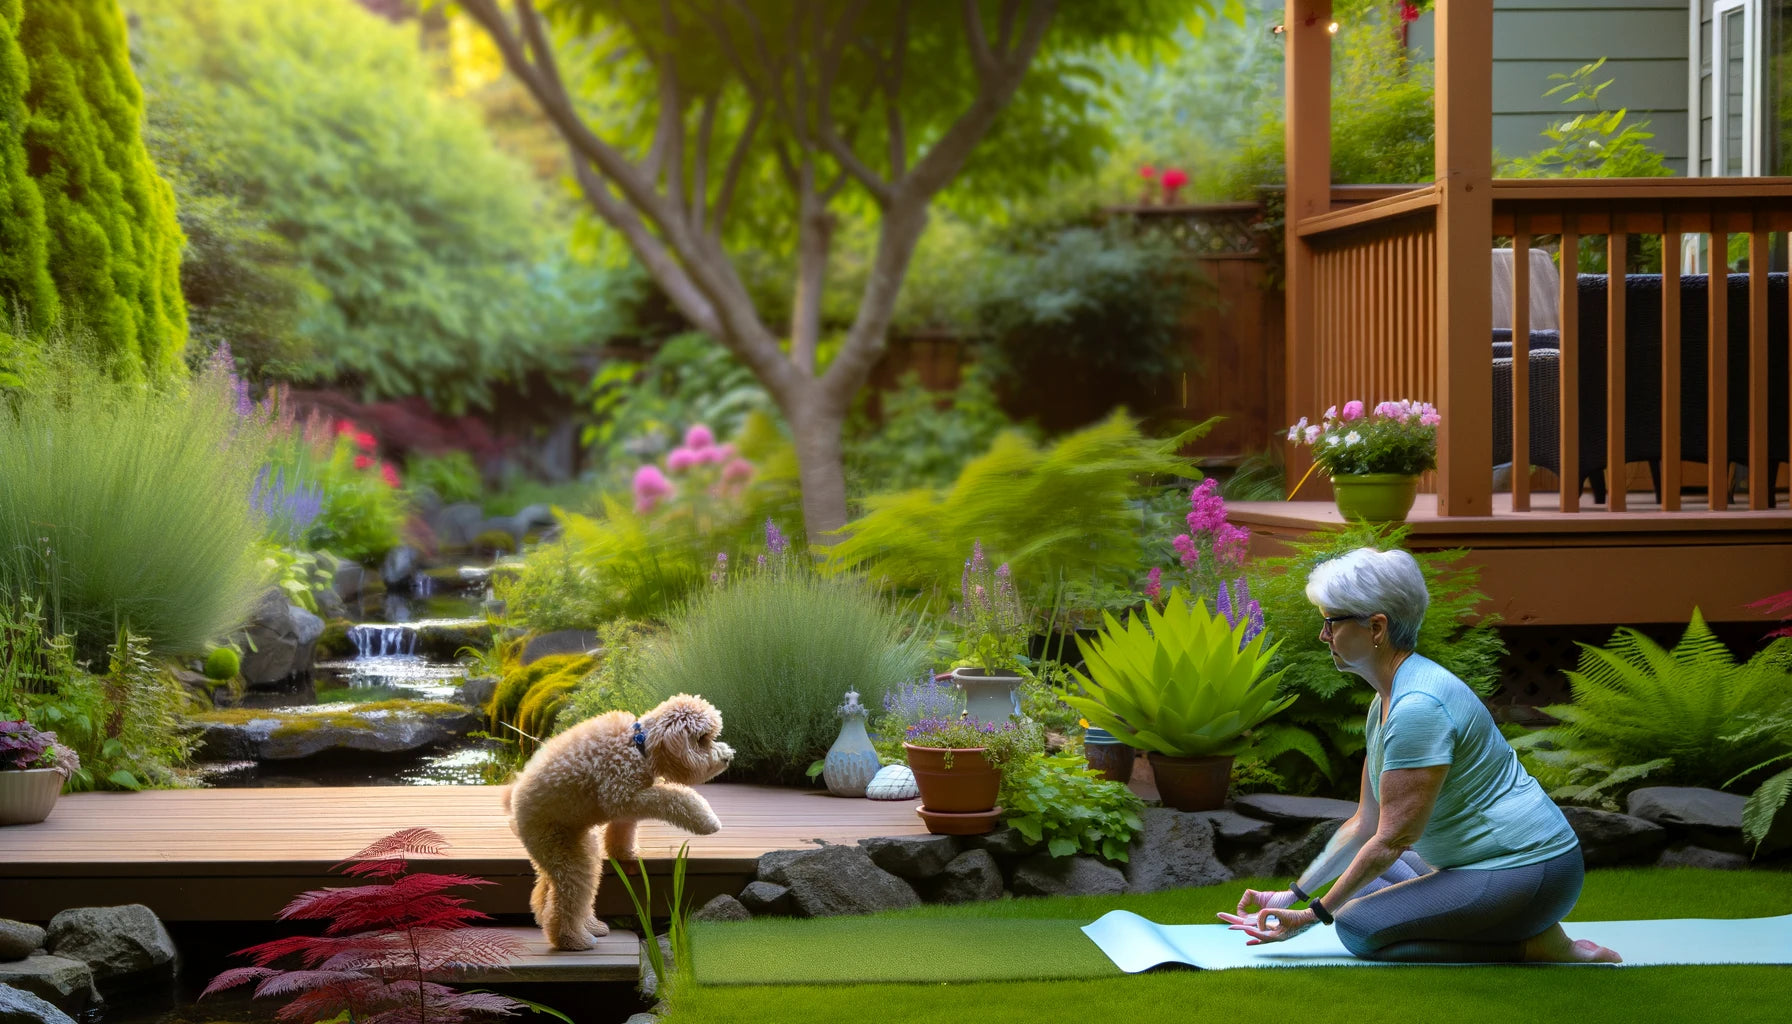 Serene image of a Baby Boomer practicing yoga in a peaceful garden with their Mini Goldendoodle sitting nearby or attempting to join in.